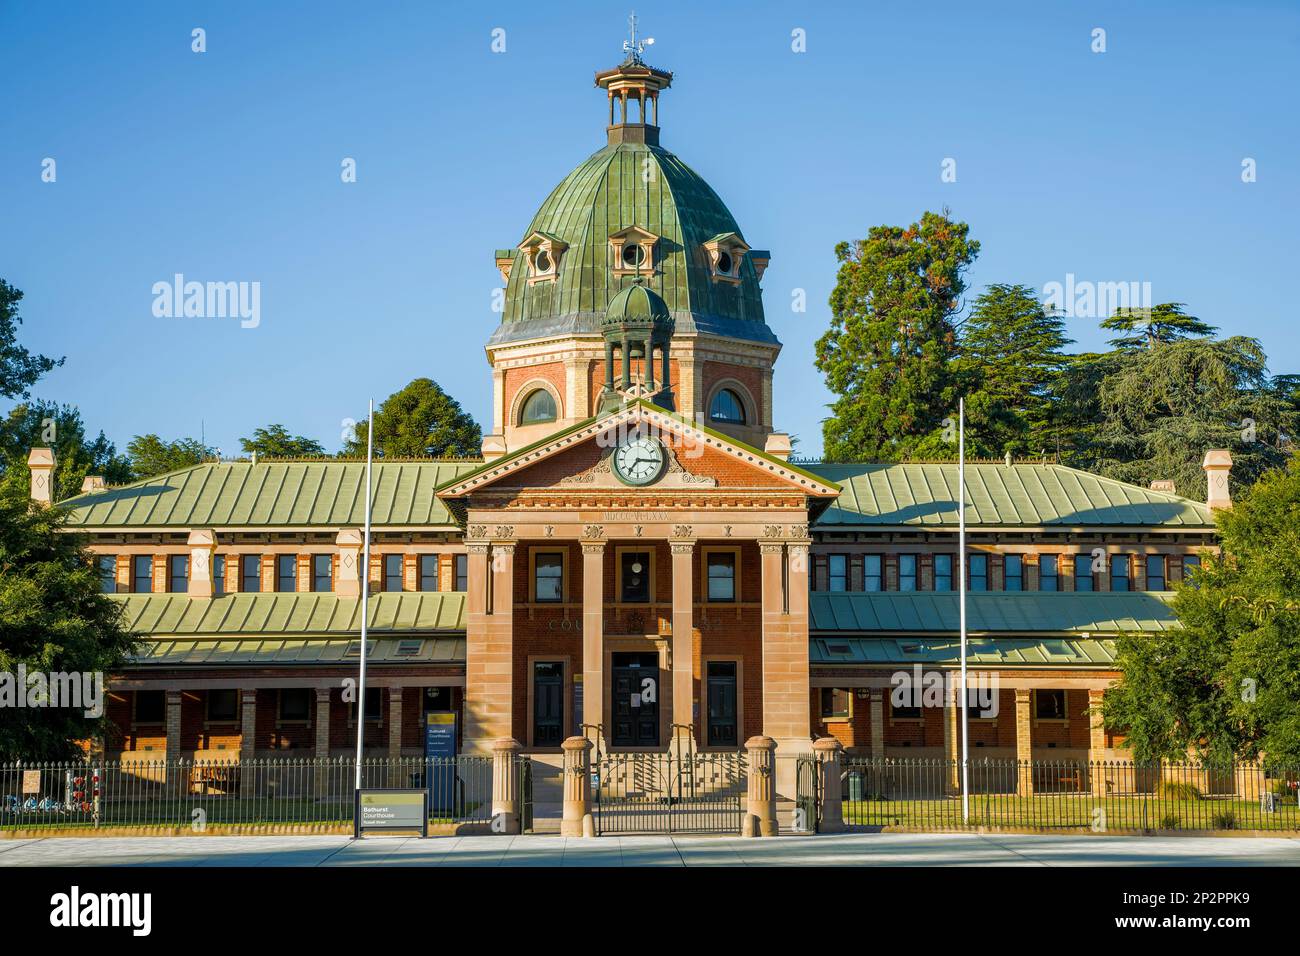 Bathurst, NSW, Australia - 8 January 2023. Completed in 1880, the magnificent domed Bathurst Courthouse is fine Victorian-era courthouse. Stock Photo